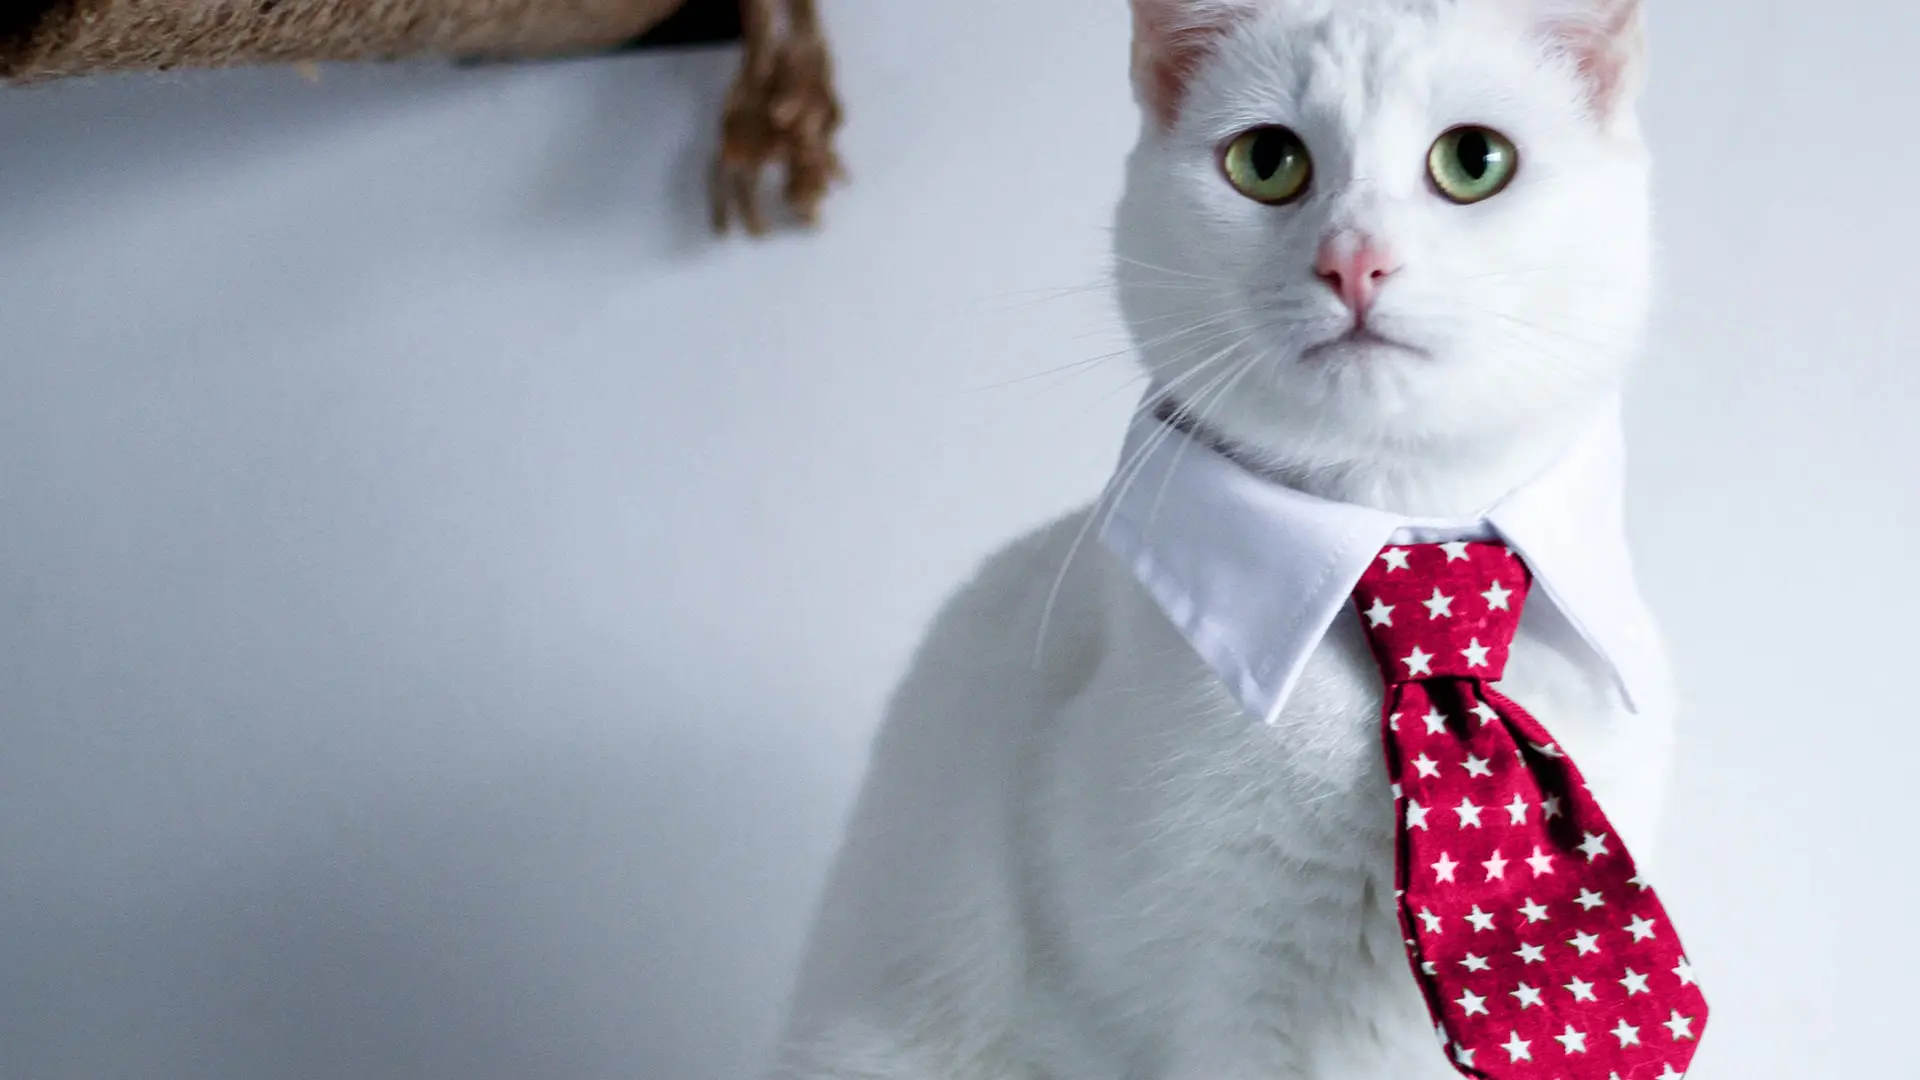 cat pretending to be a person in a tie